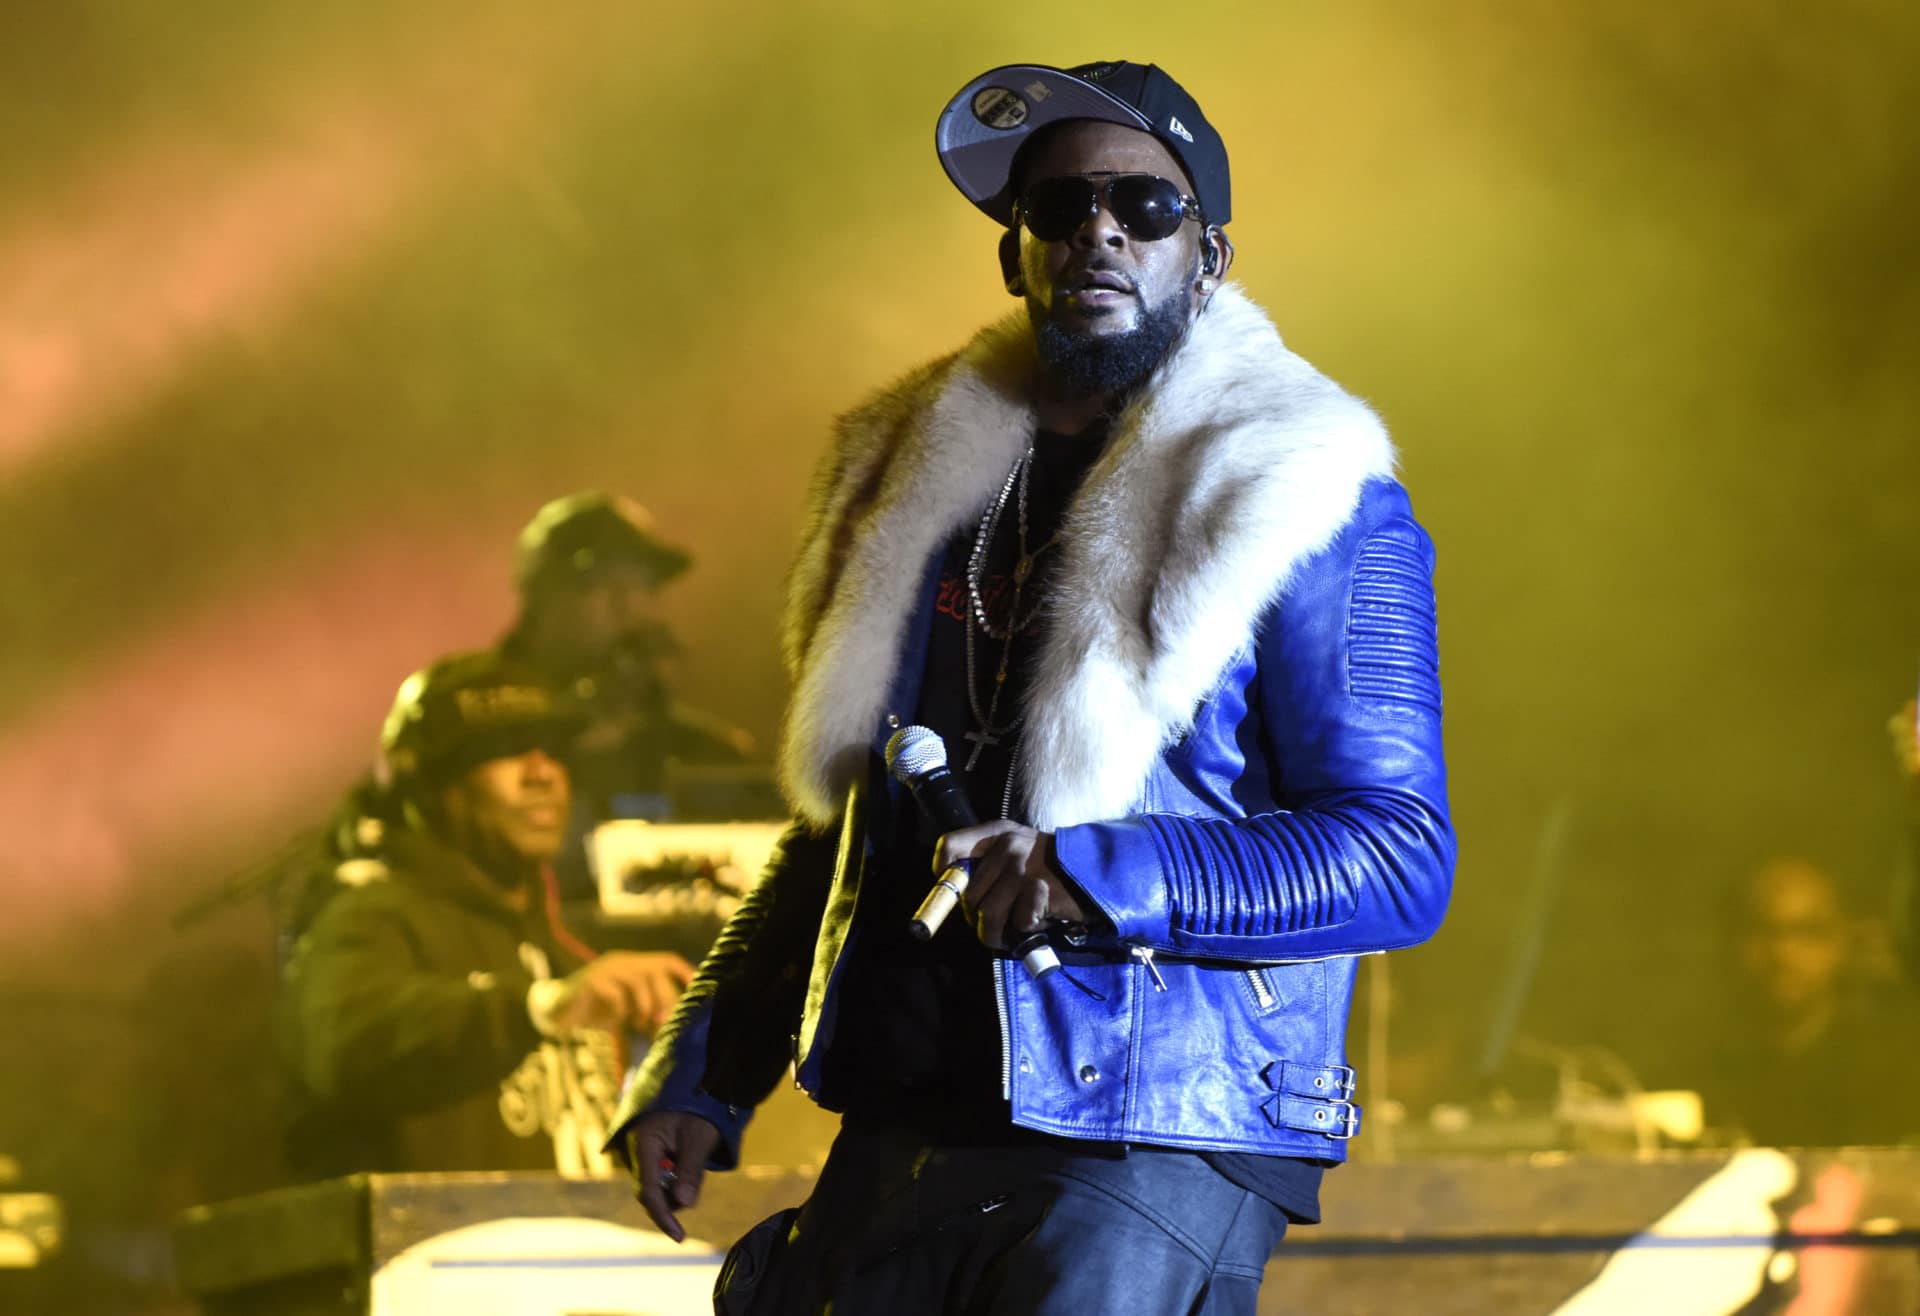 New Tape Surfaces Of R. Kelly Having Sex With Underage Girl: Report